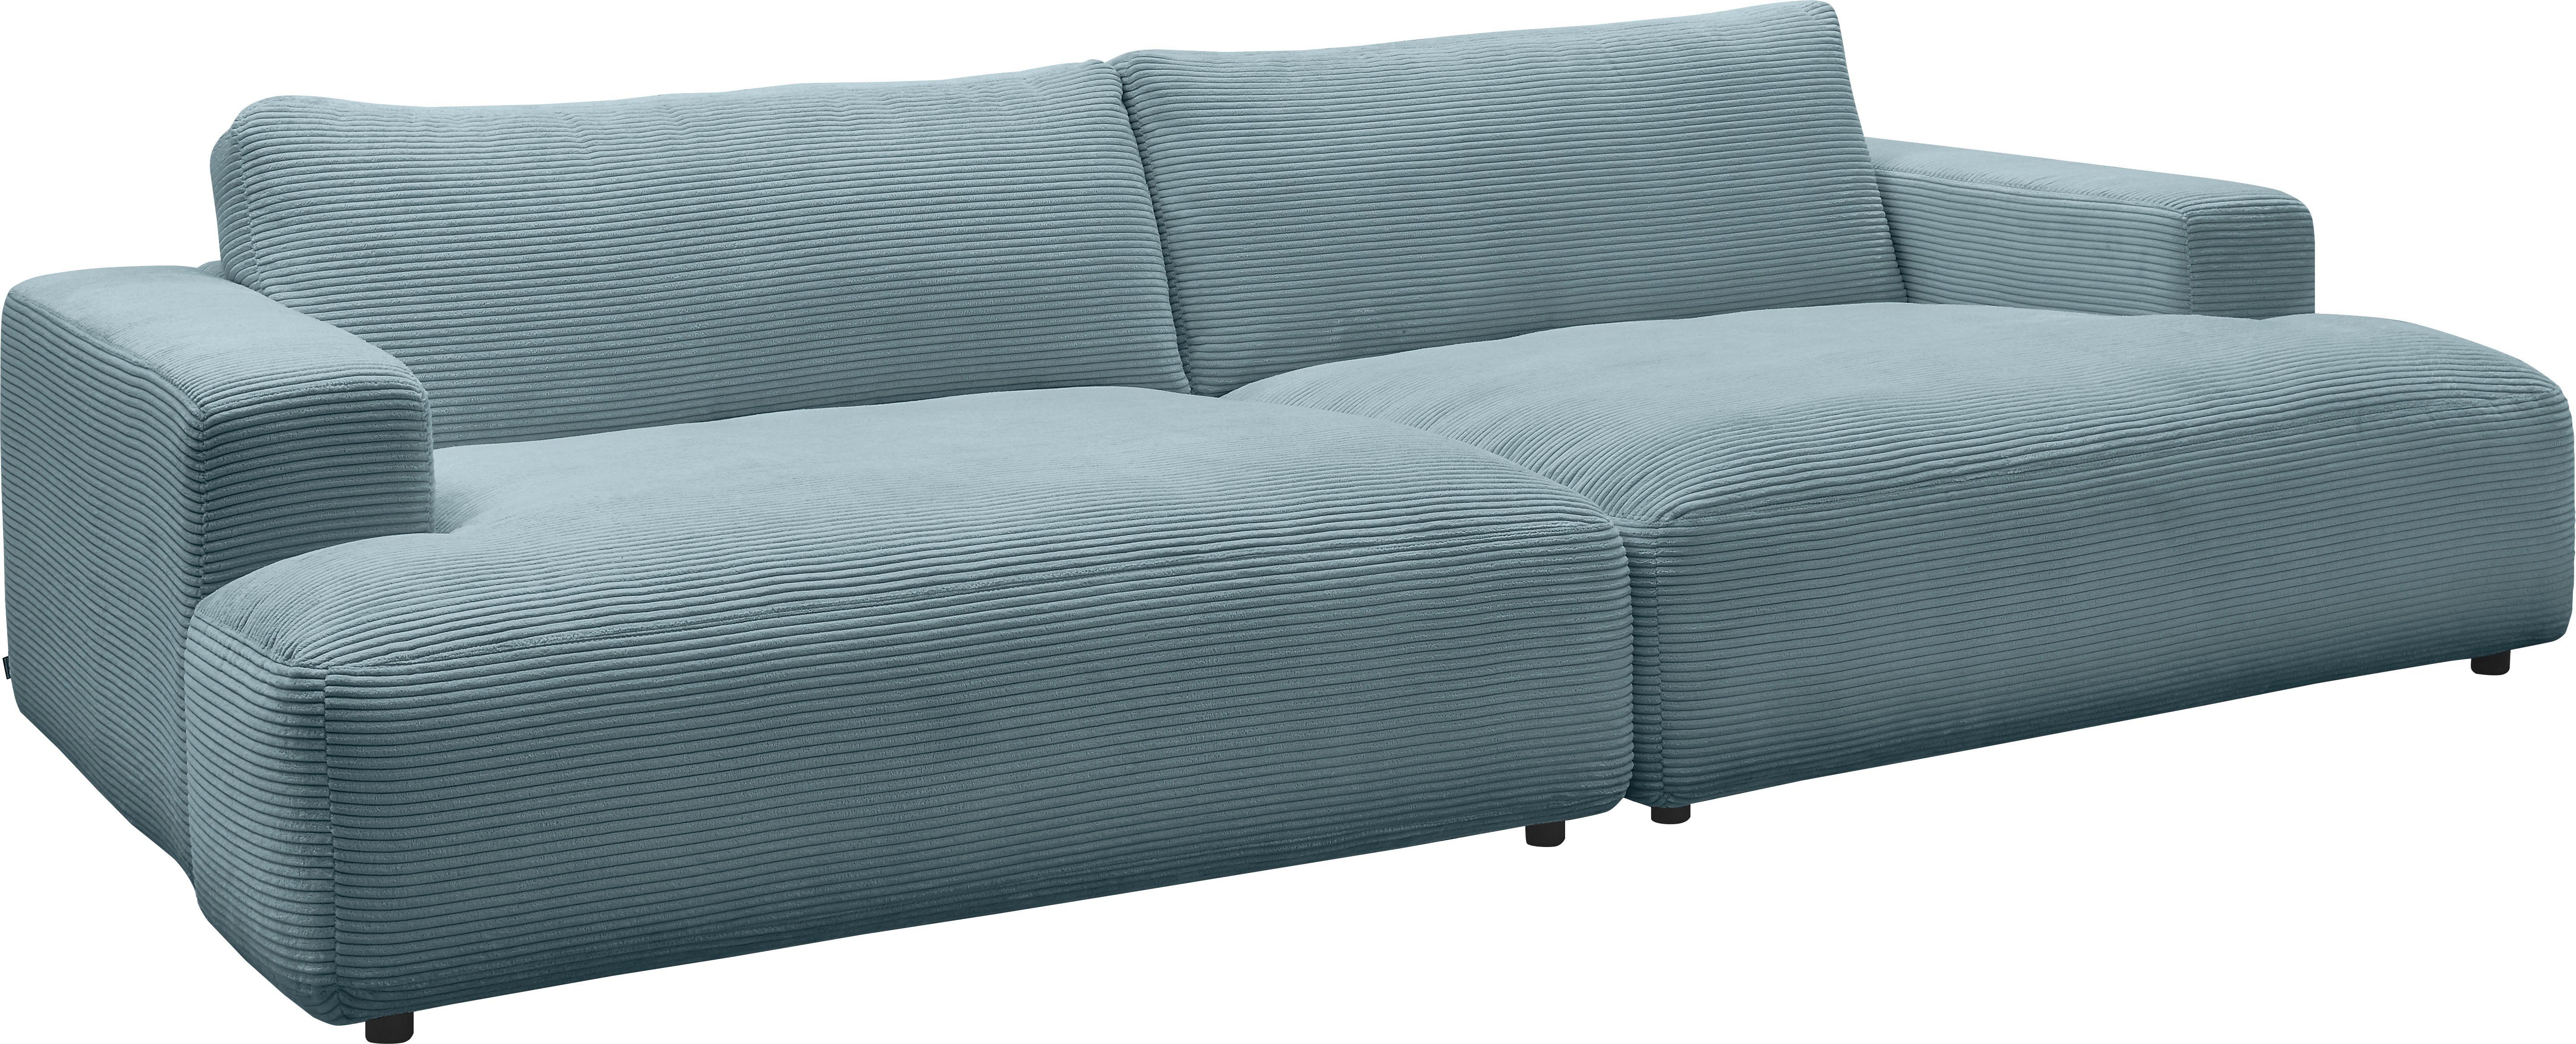 GALLERY M branded Lucia, by Cord-Bezug, Loungesofa Breite cm petrol Musterring 292